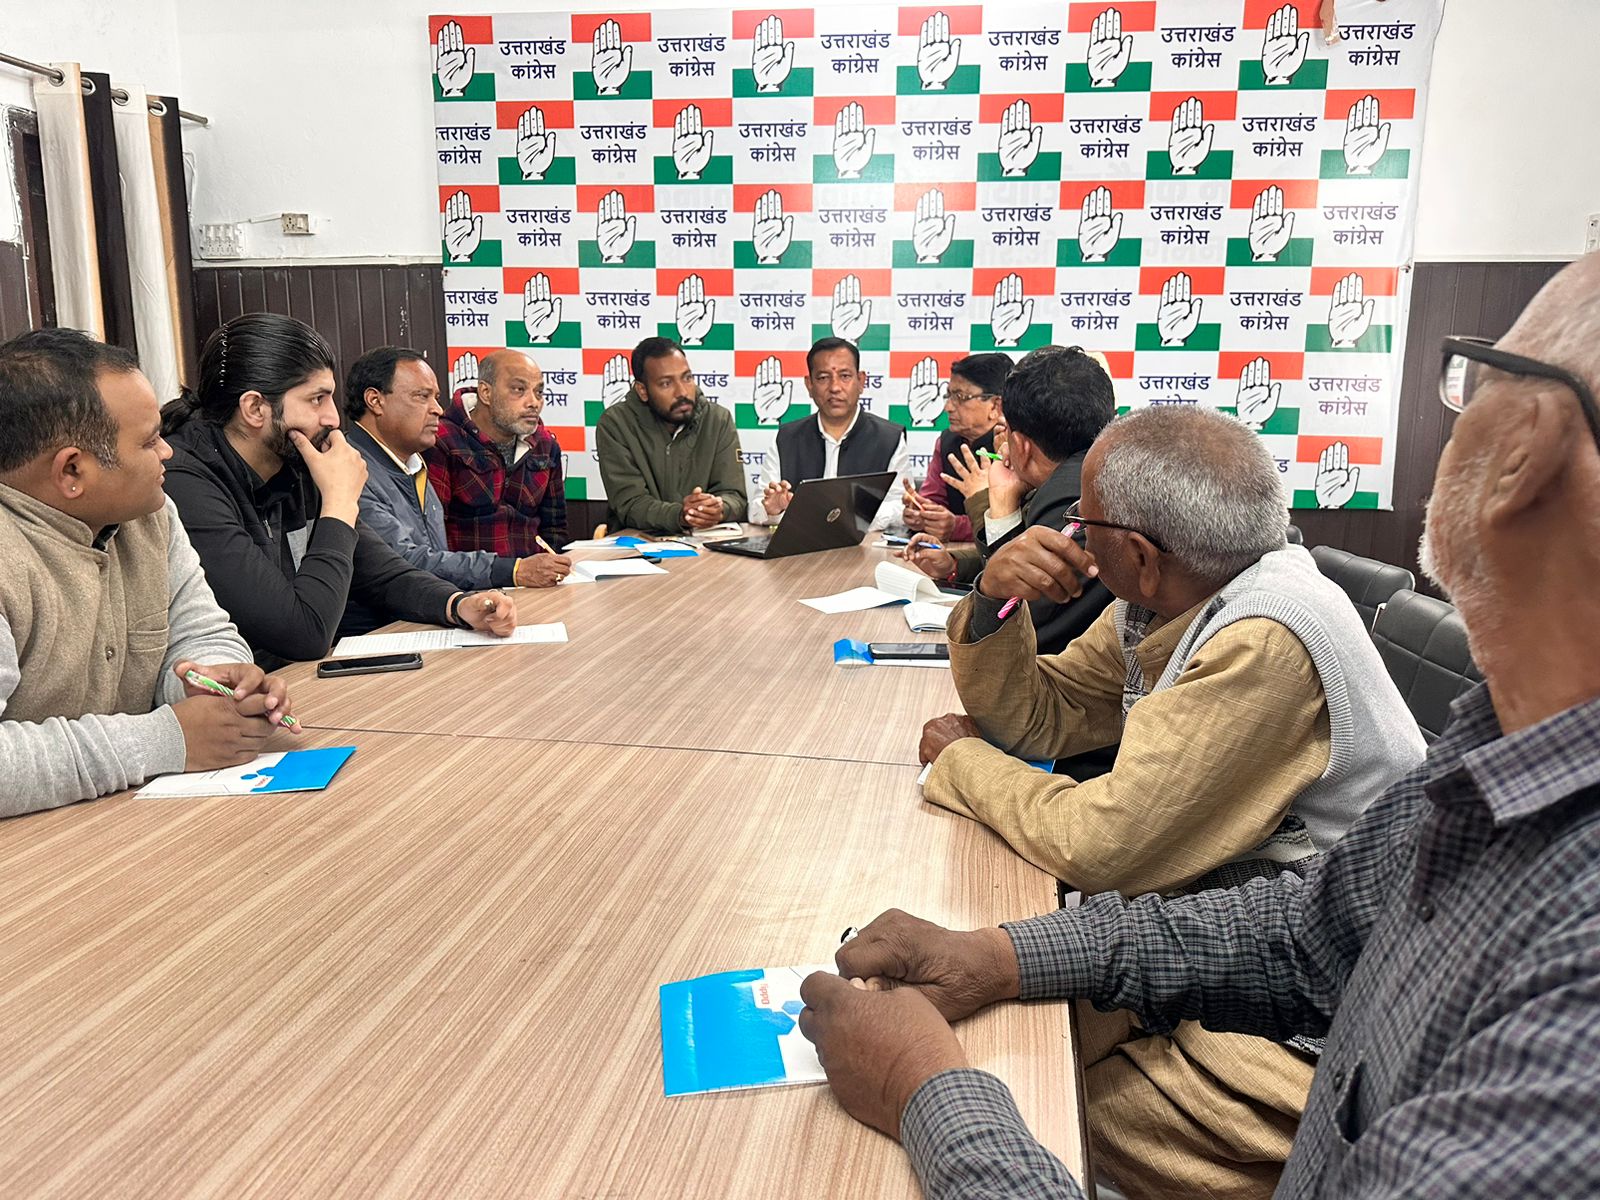 Discussion was held on the strategy to strengthen Congress at booth level.